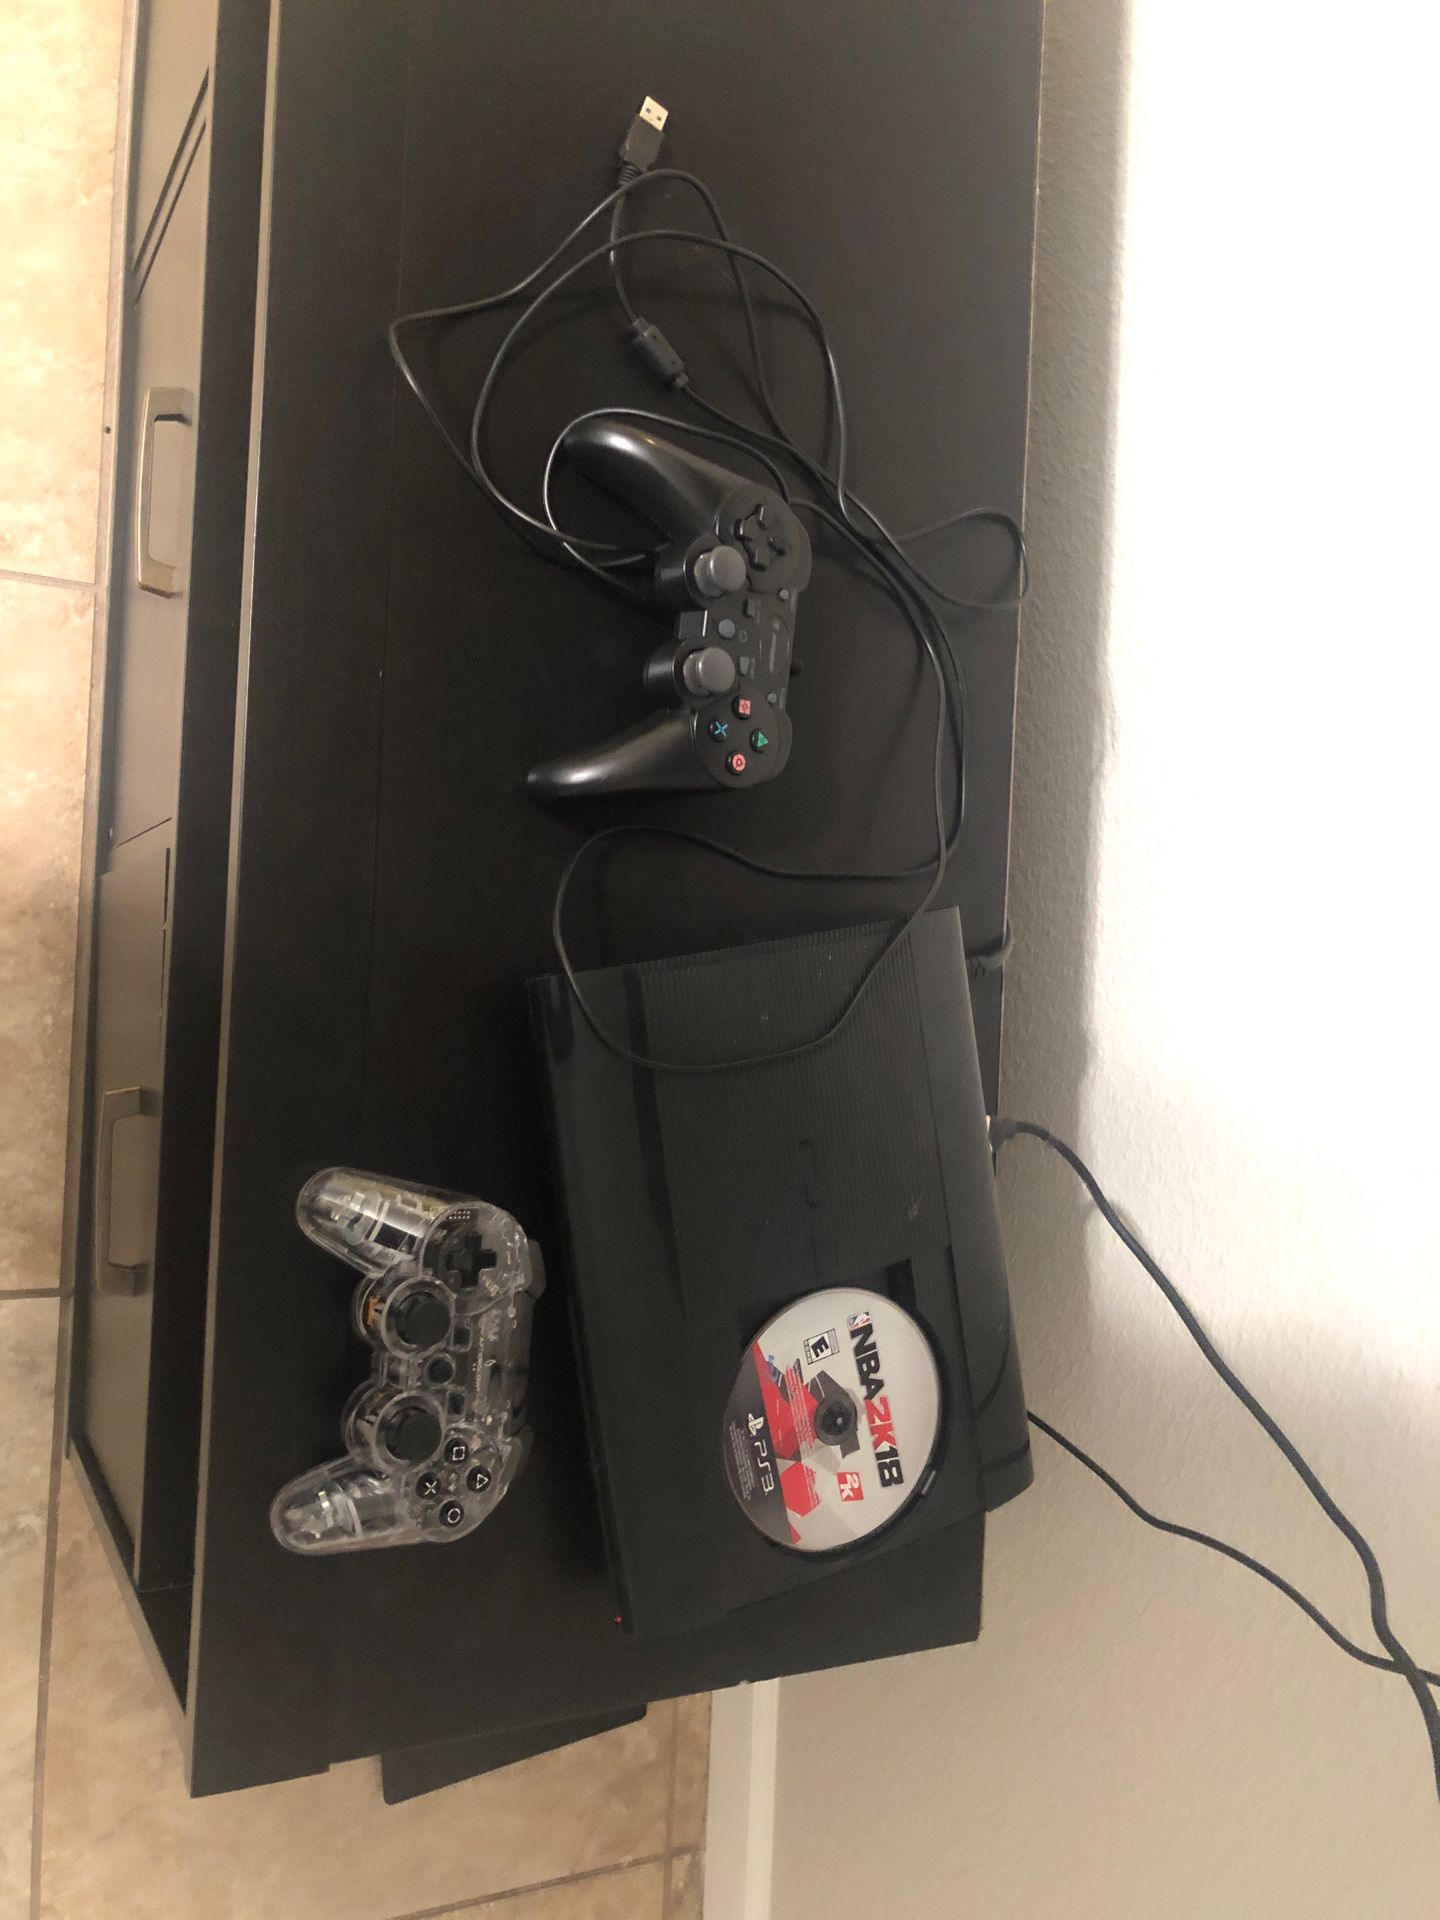 PS3 2 controllers and nba 2k 18